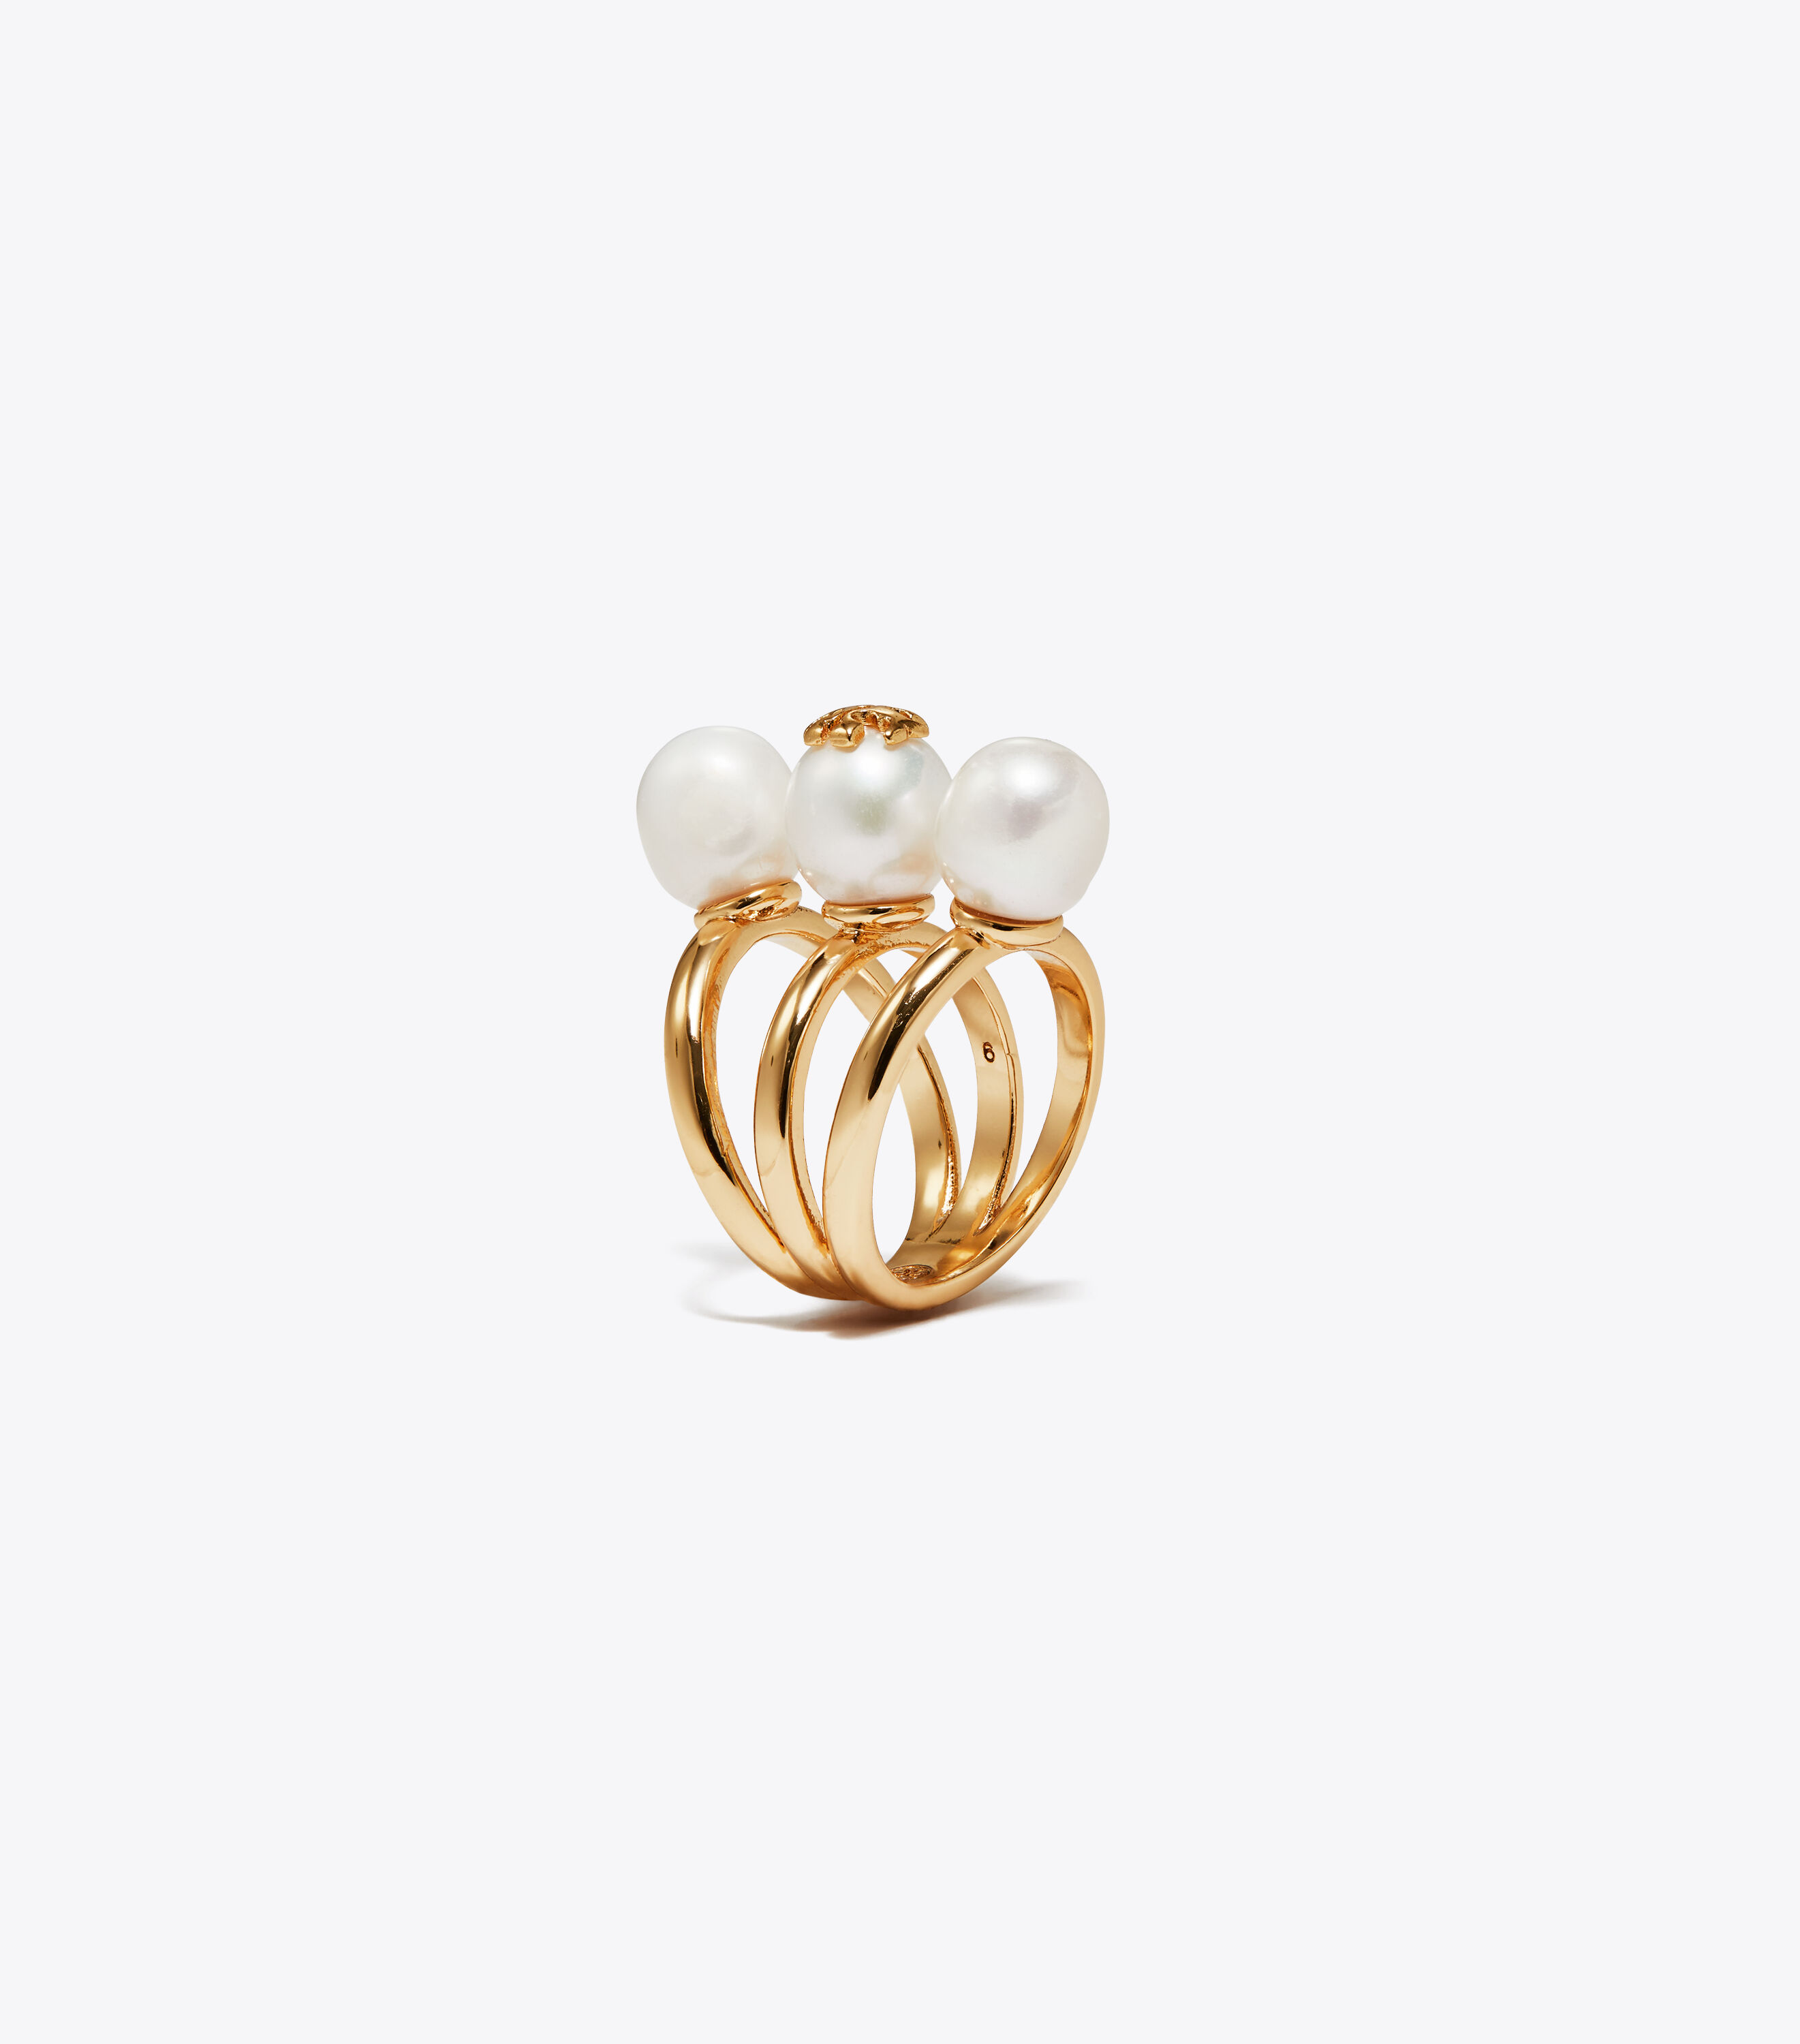 Tory Burch Pearl Ring Outlet | bellvalefarms.com